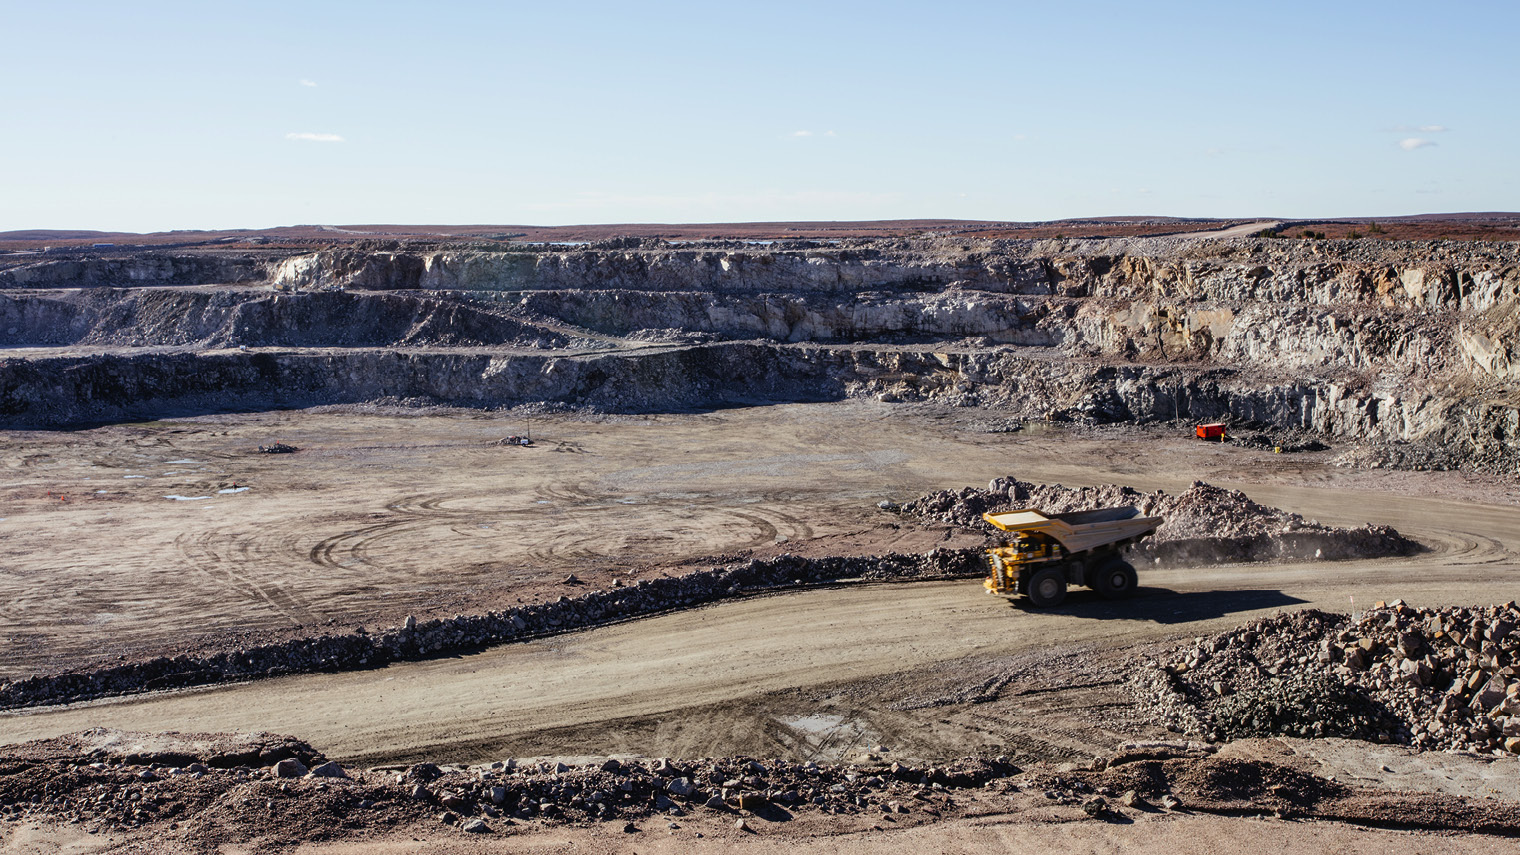 Gahcho Kué is a massive open pit mine, a rare prospect in an industry that has had to dig deep, expensive mines to find diamonds